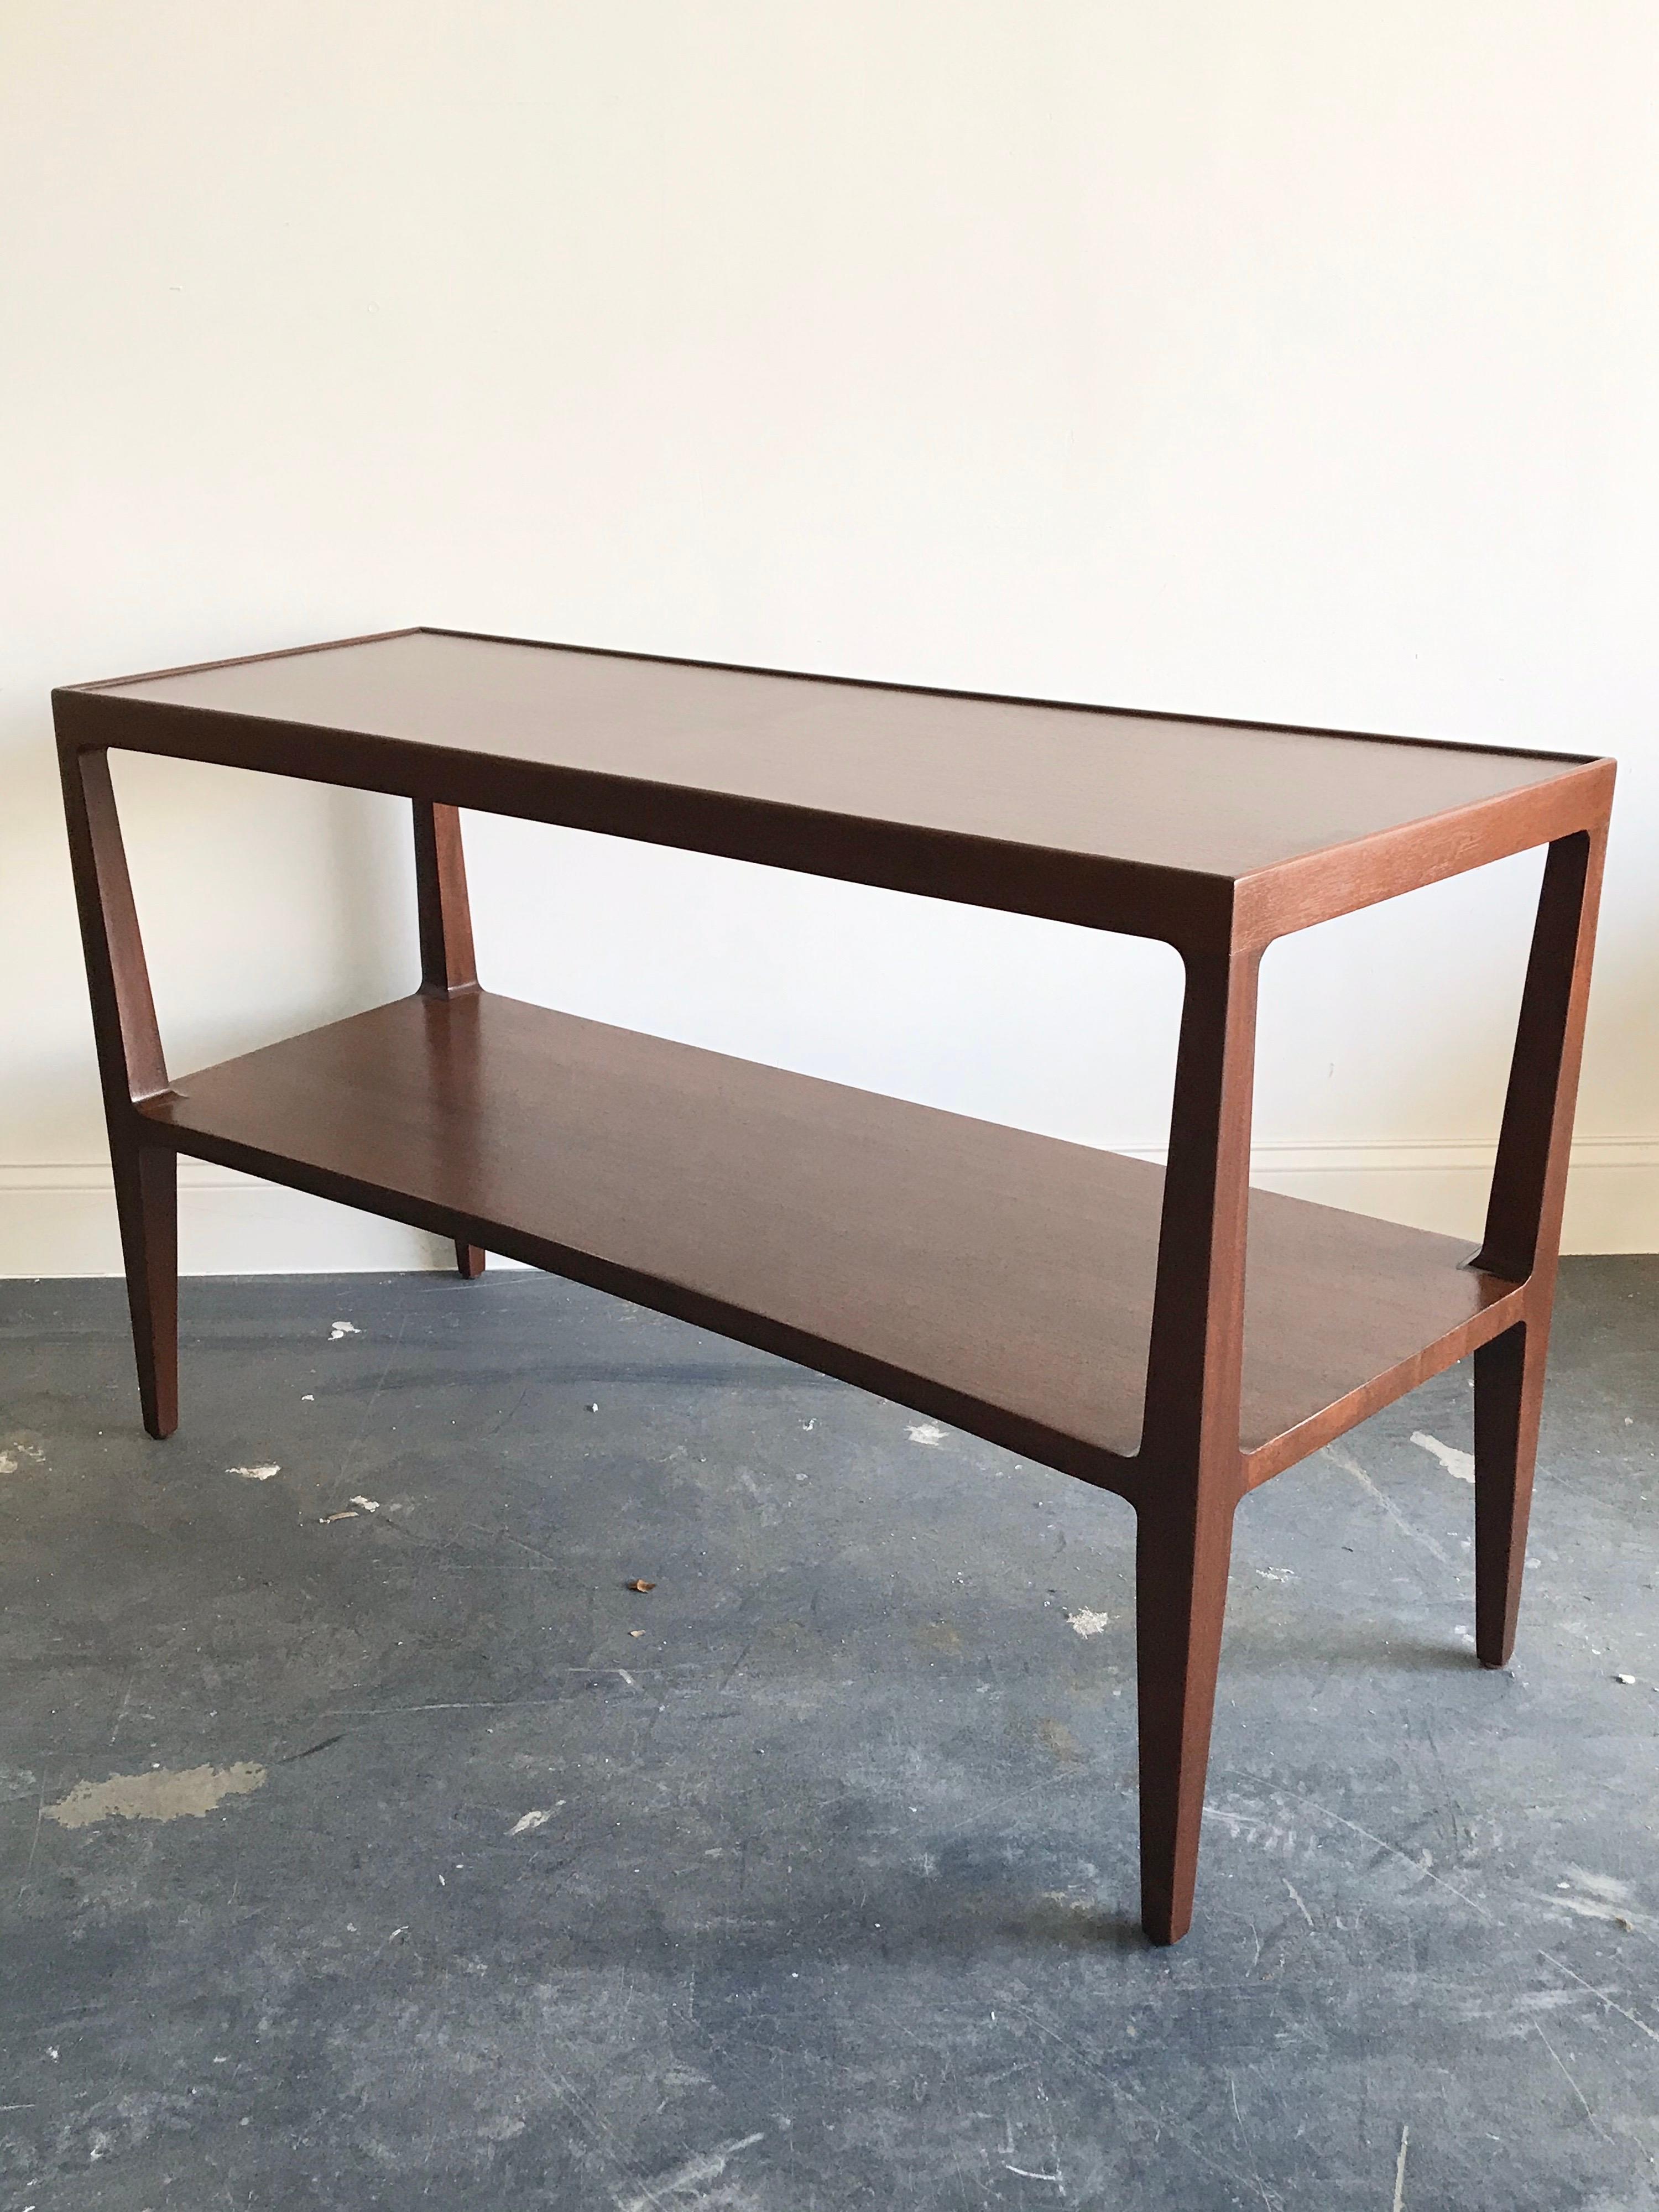 Restored console table designed by Edward Wormley for Dunbar. Features a two-tier design done in mahogany. A soft lip follows the outline of the top shelf, with sculpted legs, angled ends, and graceful curved front. Relatively uncommon